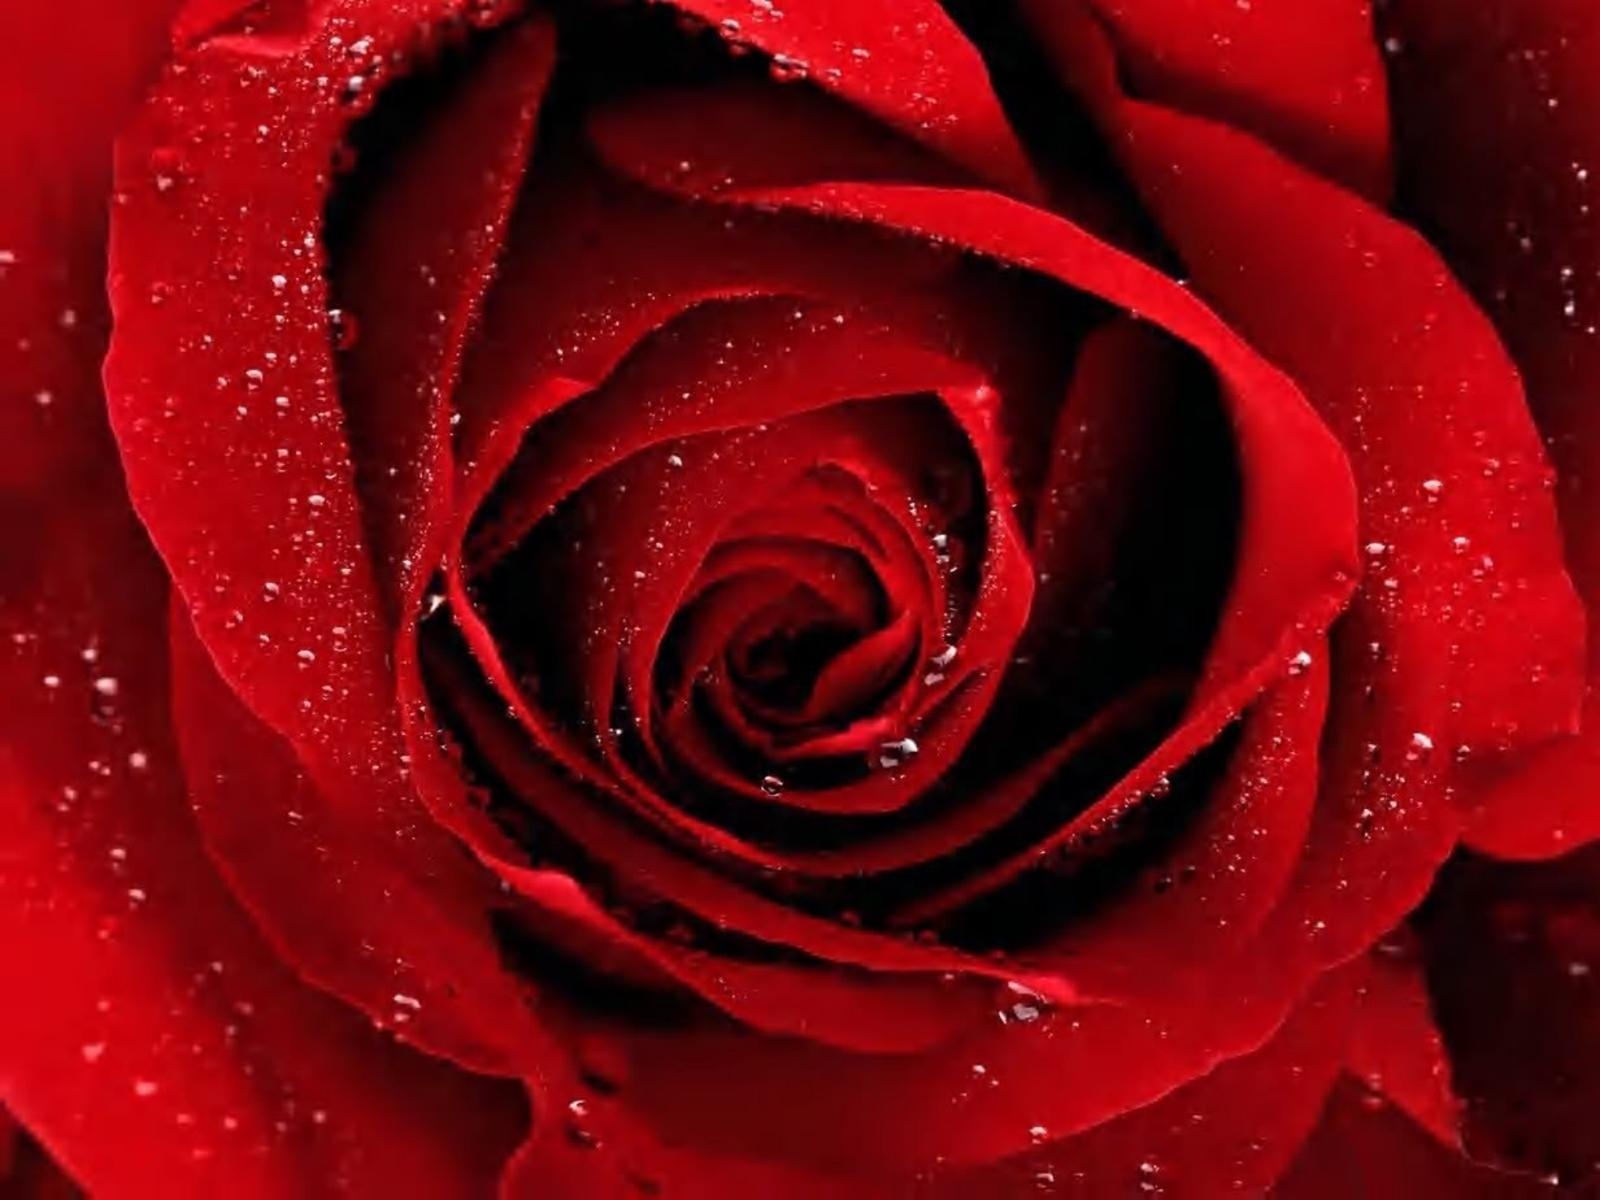 10 New Red Roses With Black Backgrounds FULL HD 1080p For ...